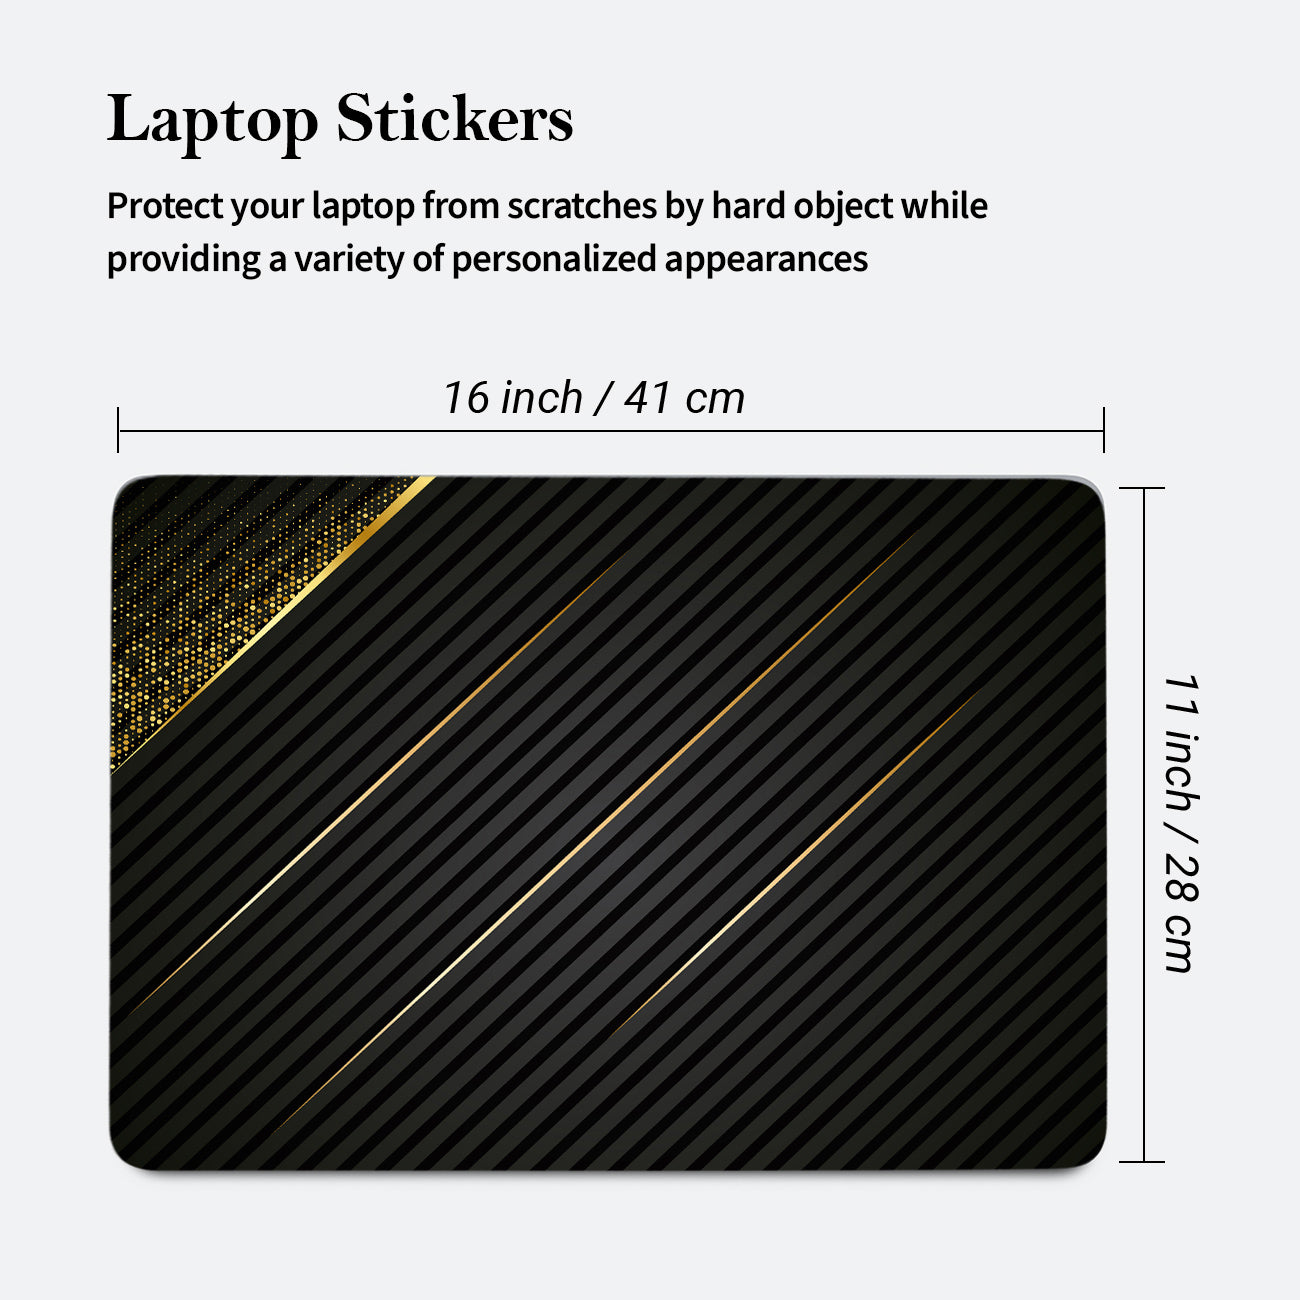 kalit kala Decor Laptop Decals for All Laptops Upto 15.6 inch - Self Adhesive Leaf Printed Vinyl Laptop Skins / Stickers for HP Apple Acer Asus Dell LG and All Laptops